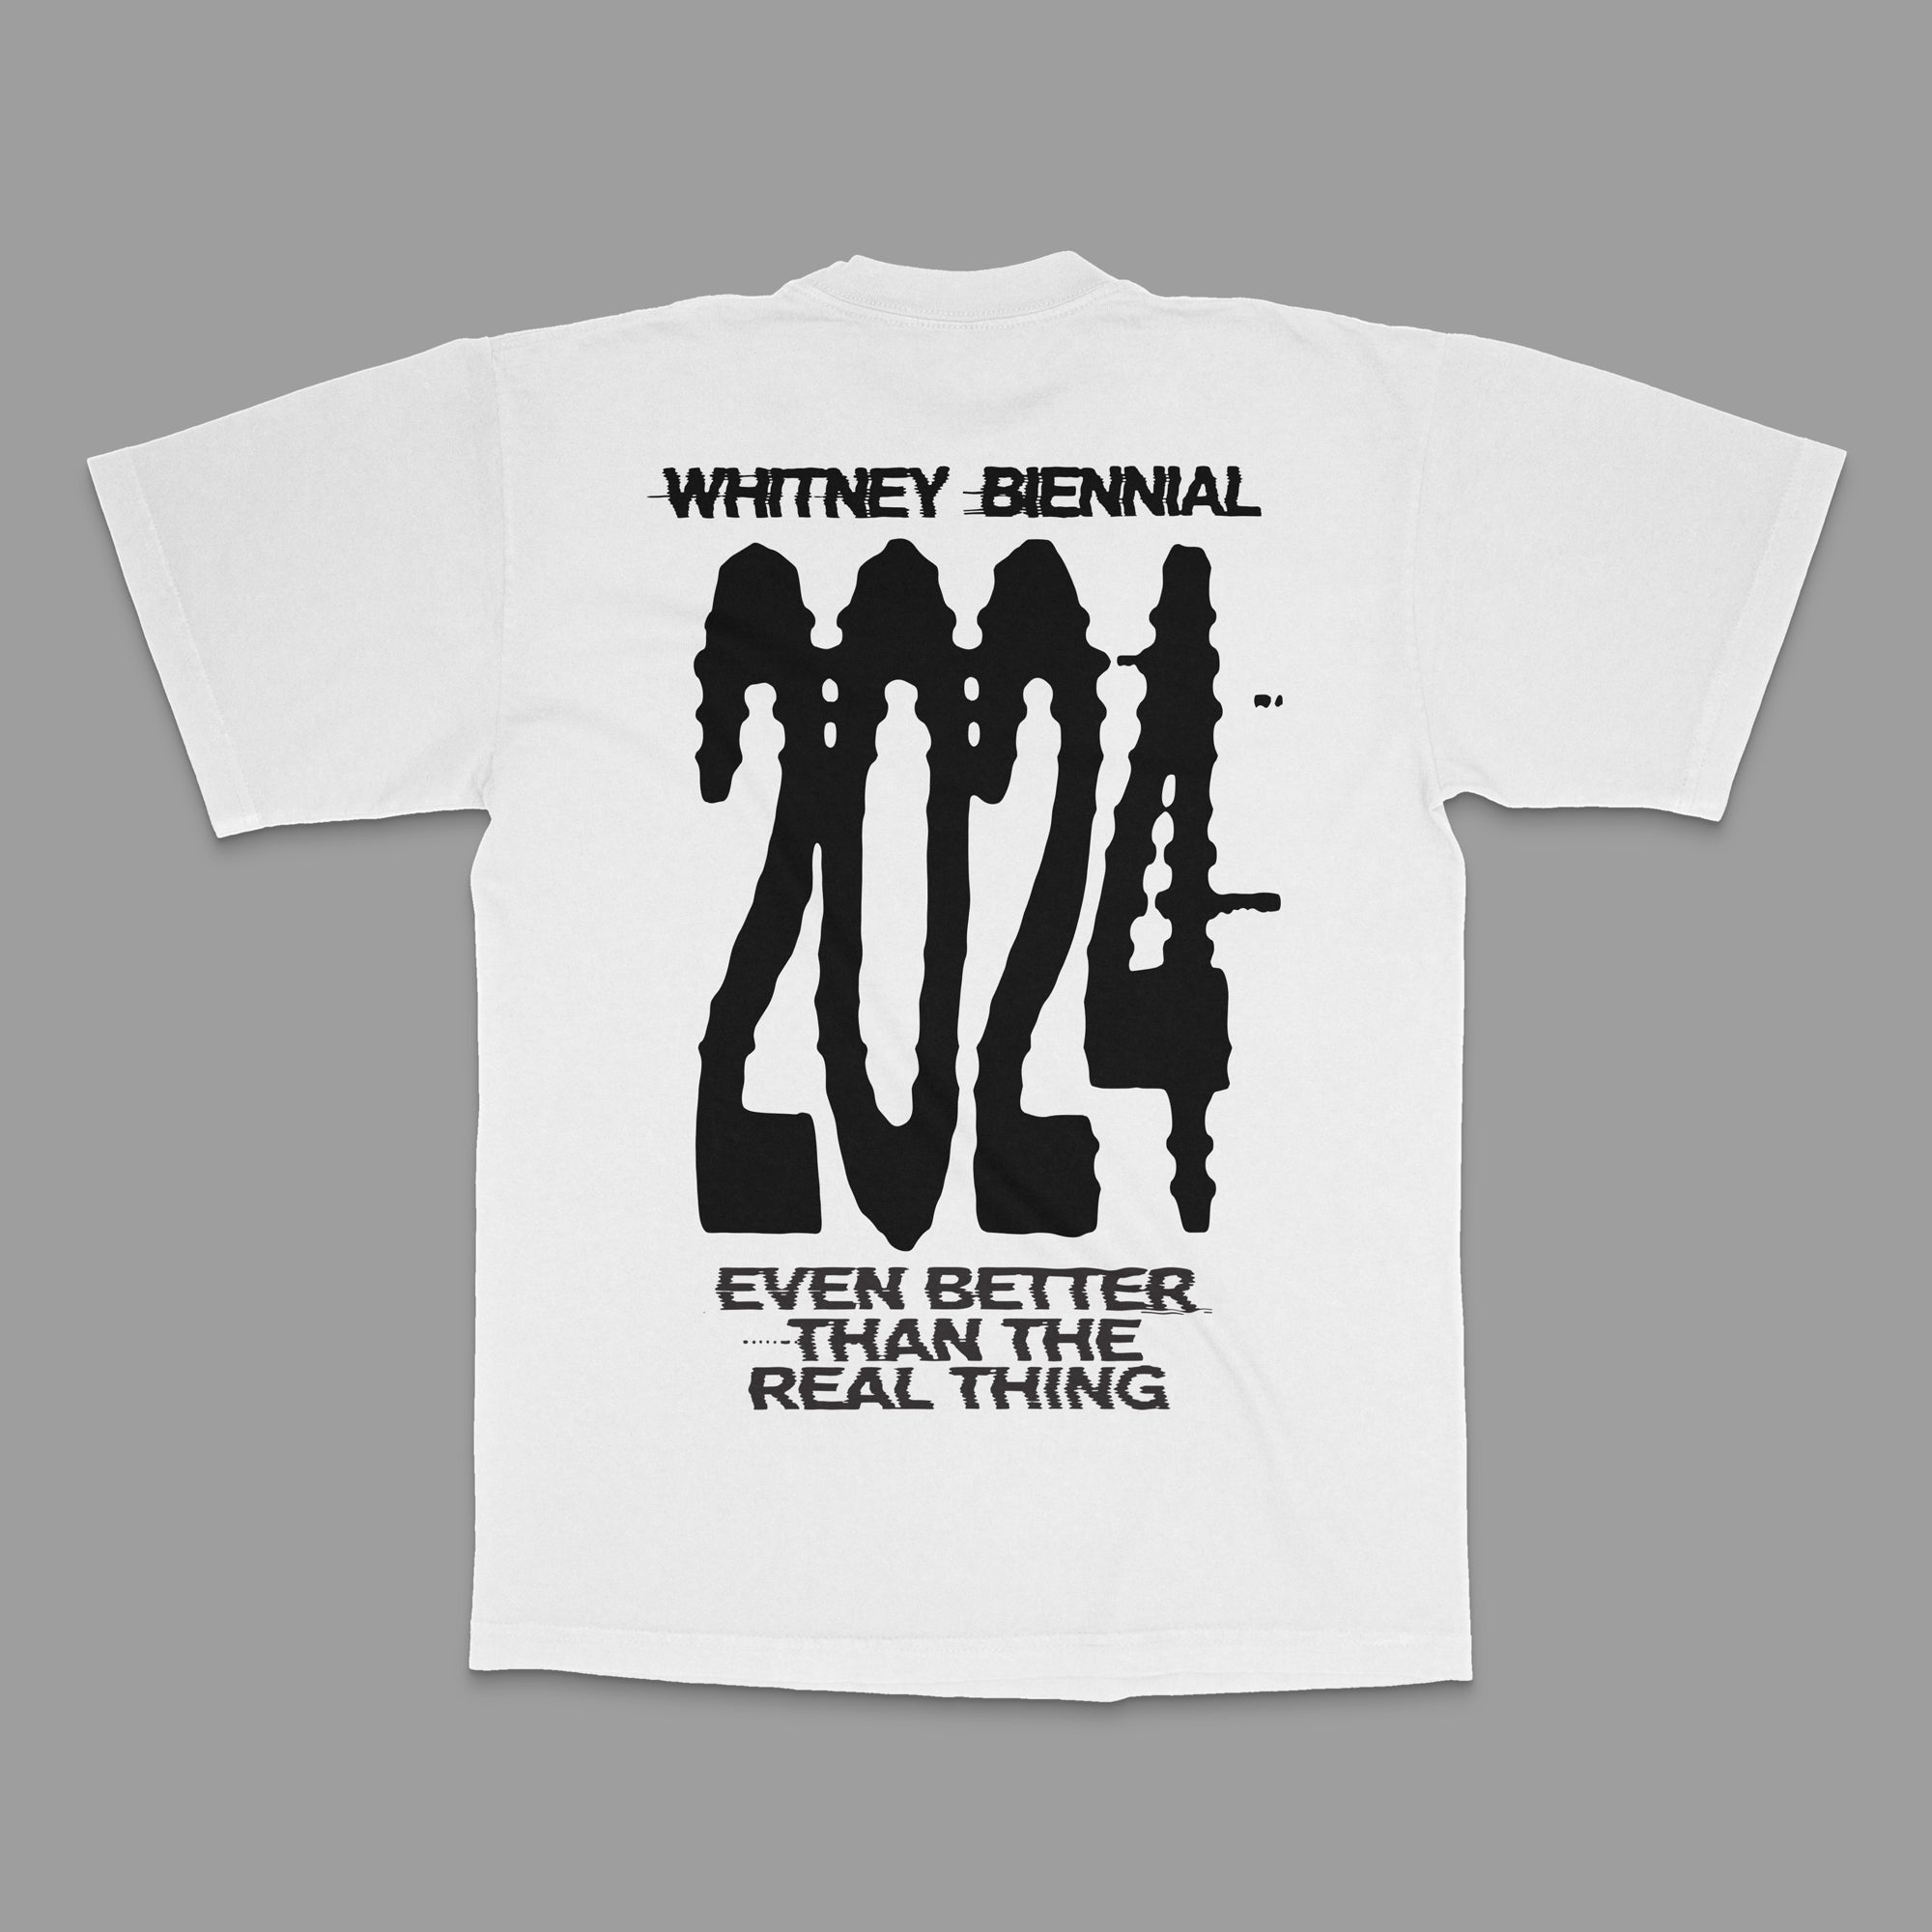 100% cotton white short sleeve t-shirt with black text featuring Whitney Biennial 2024: Even Better Than The Real Thing